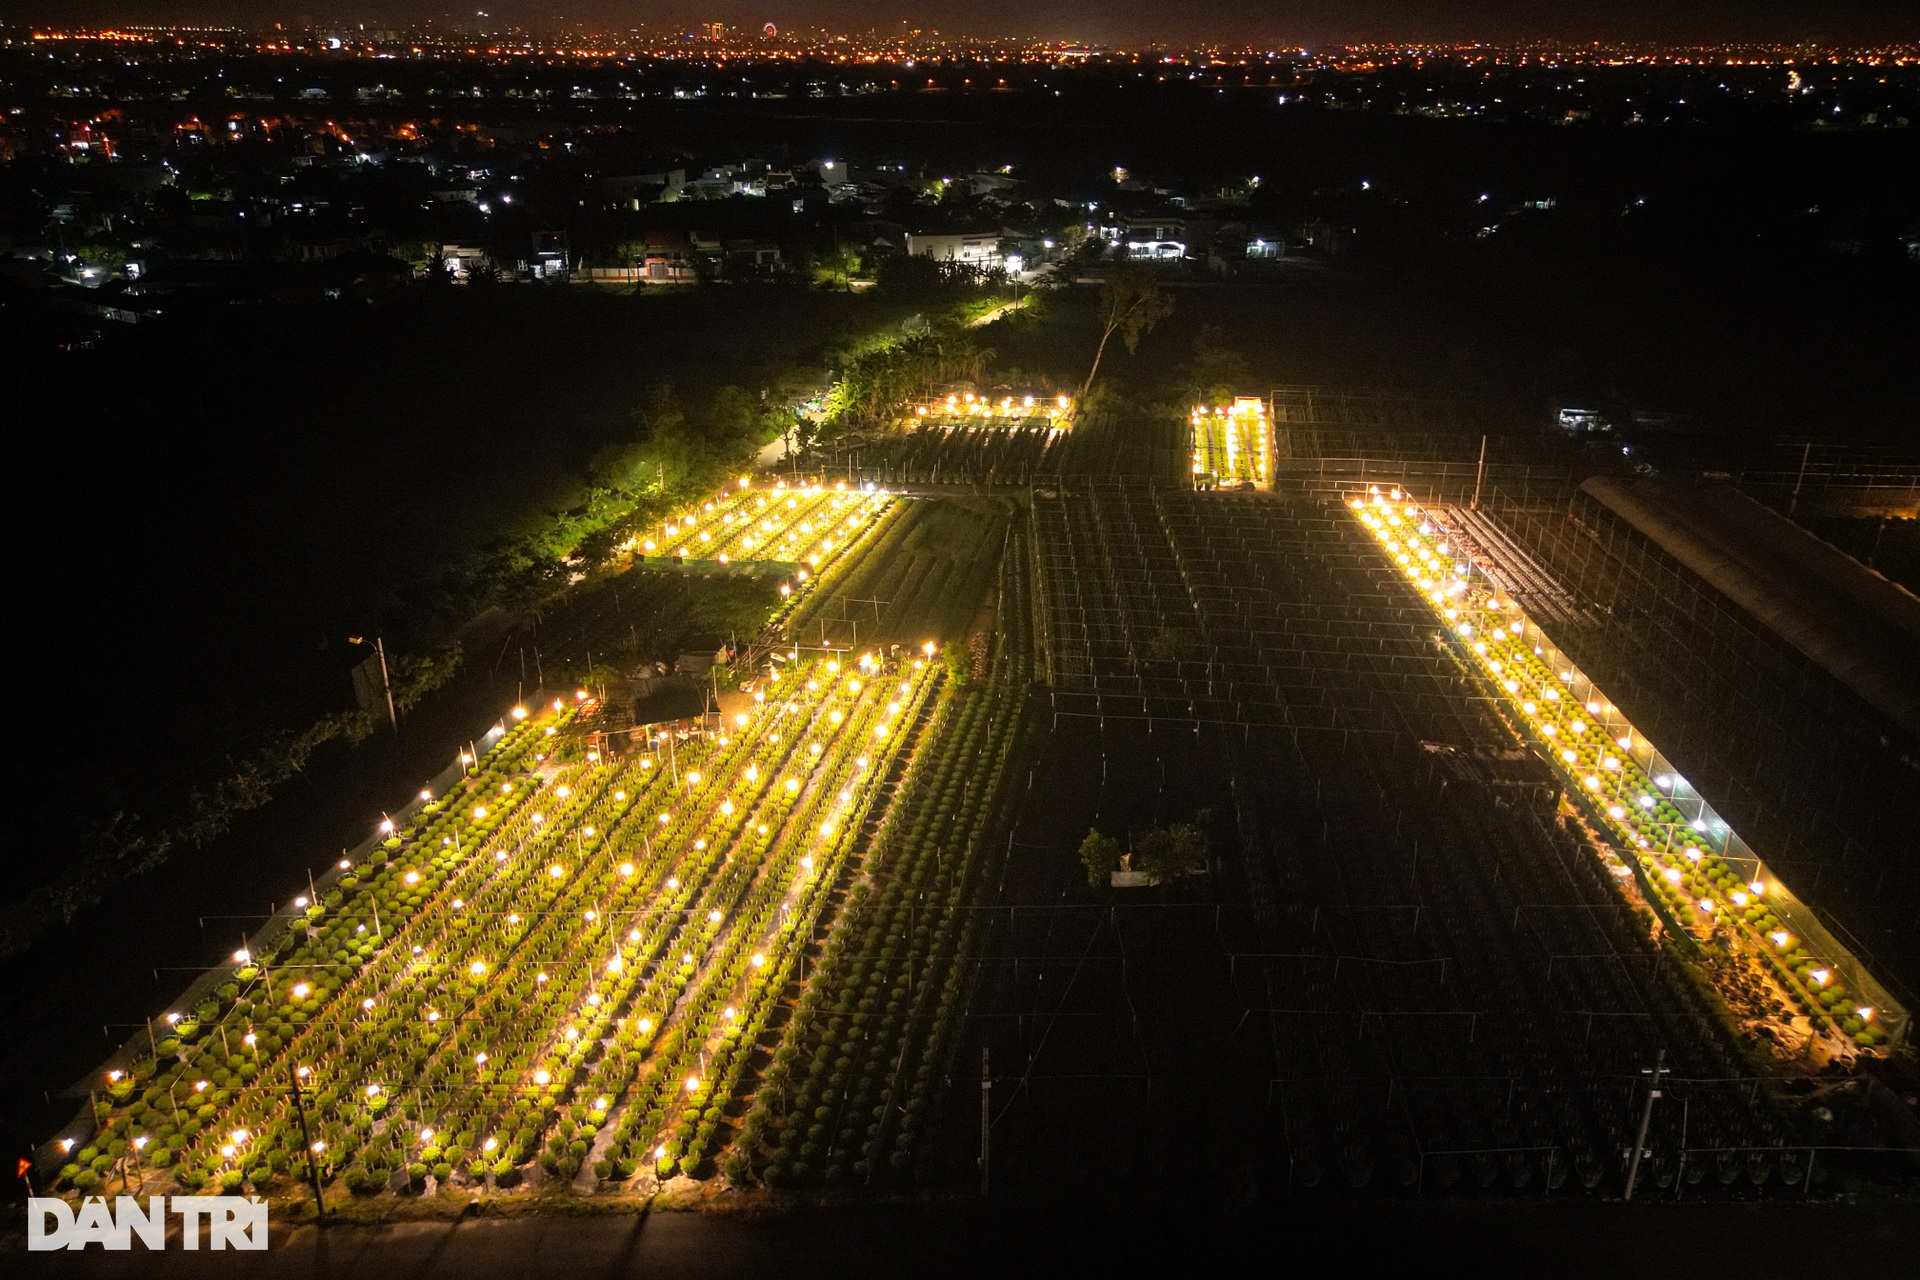 Da Nang flower village lights up brightly to catch flowers waiting for Tet - 1